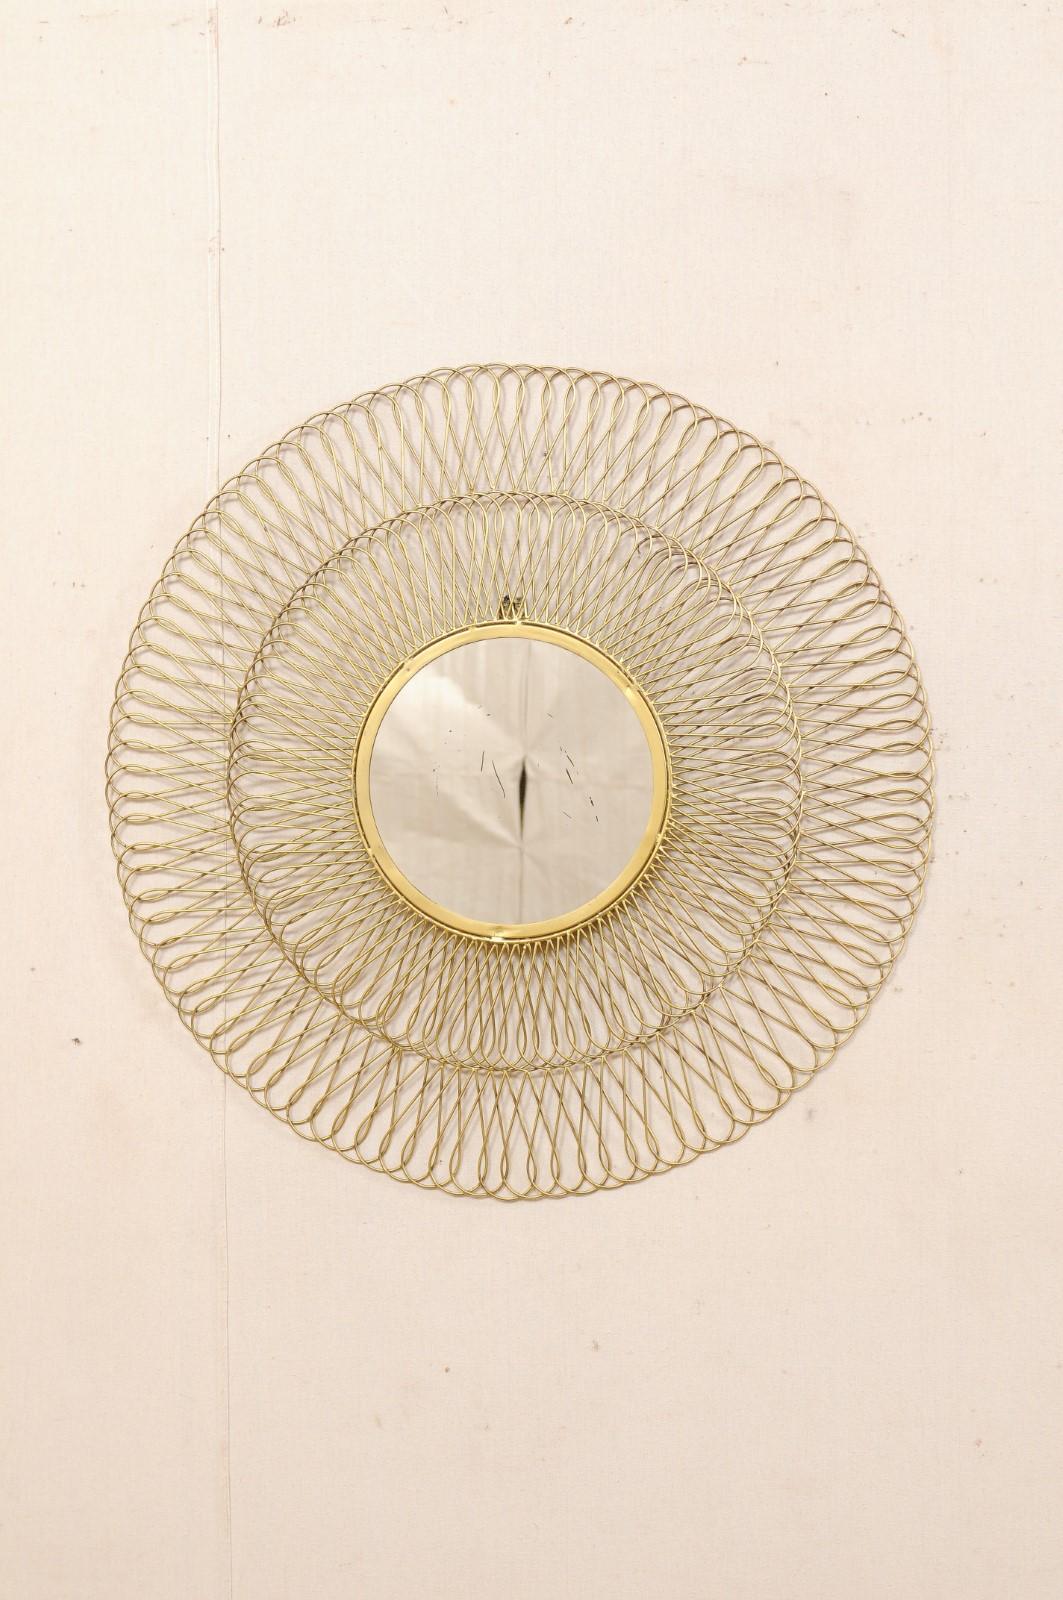 A vintage Spanish round-shaped mirror with brass surround. This decorative wall mirror from Spain features a circular mirror center with a brass surround comprised of two rows of intertwining loops, with an overall diameter of 32 inches. Note that